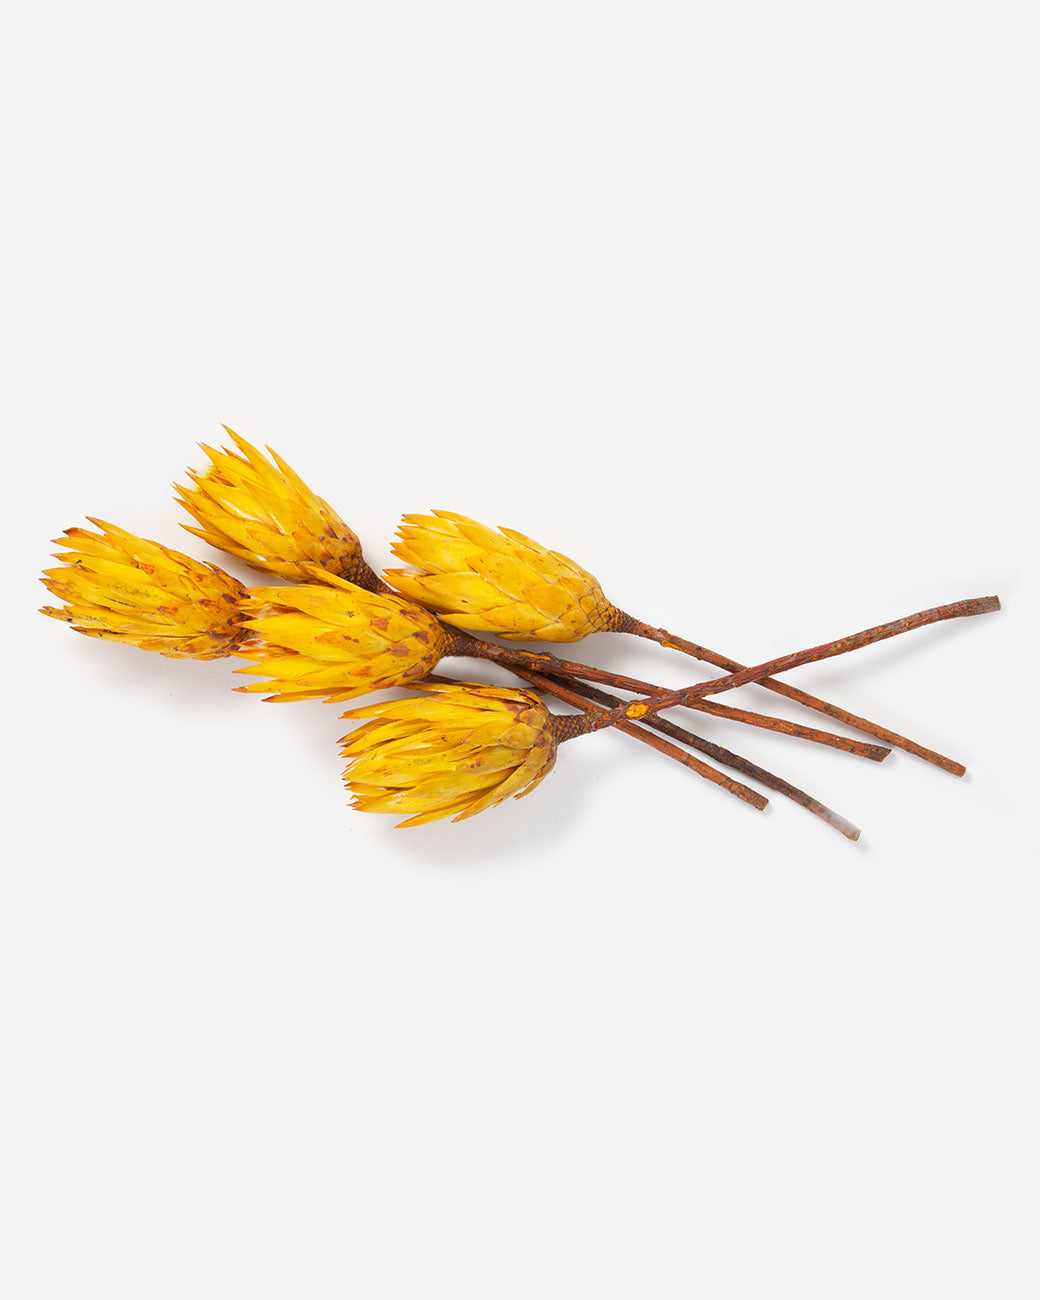 Loose bundle of dried yellow protea.